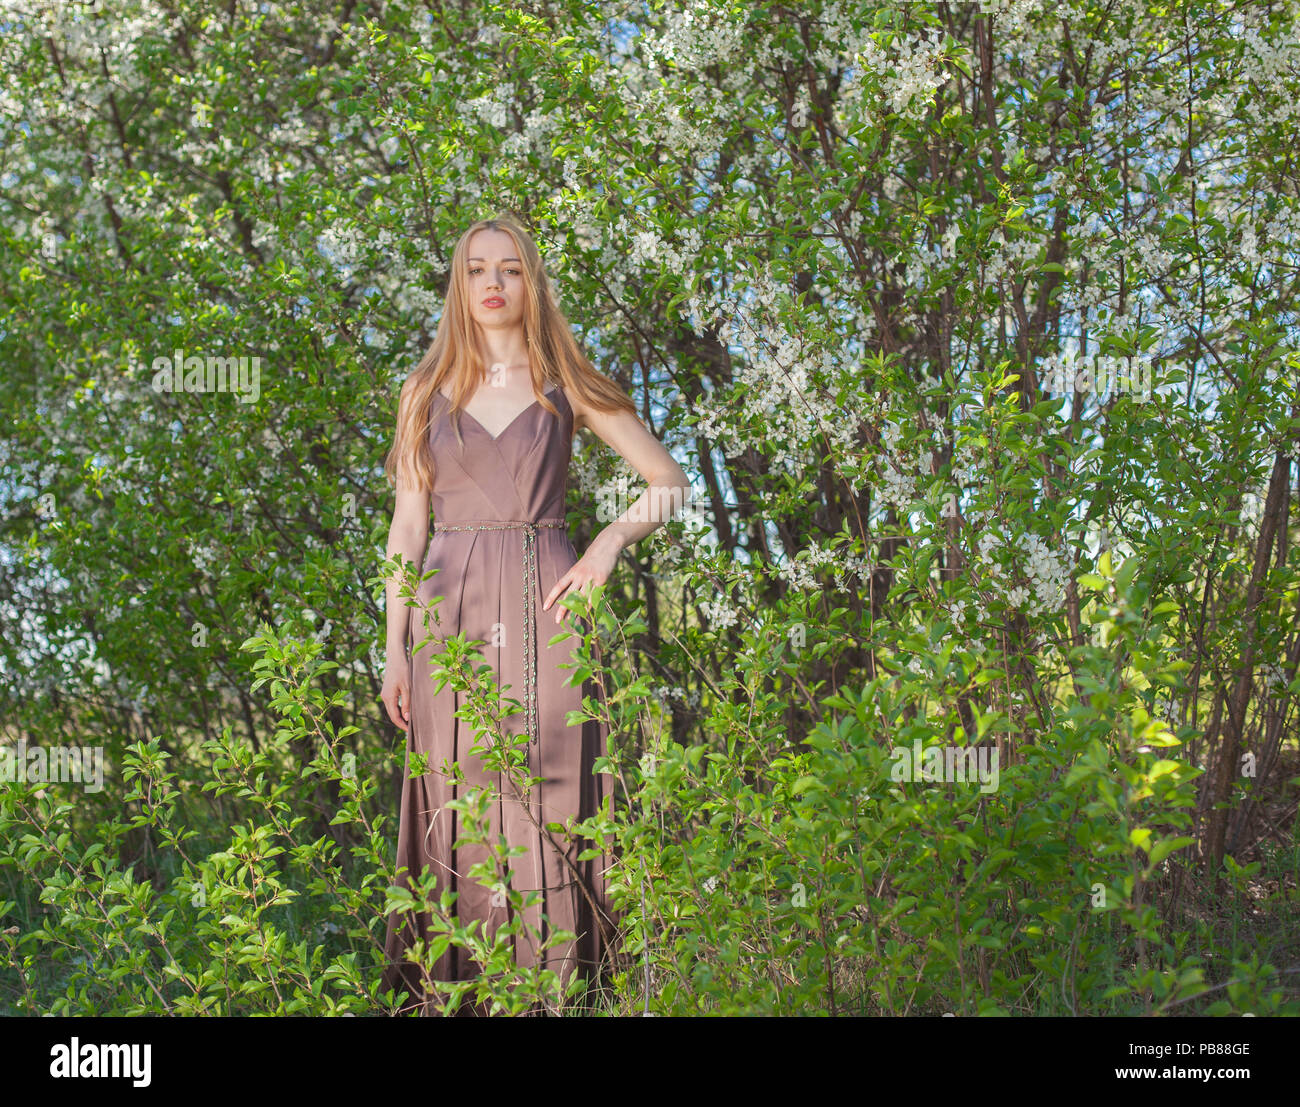 beautiful girl in a summer dress surrounded by a blossoming tree Stock Photo